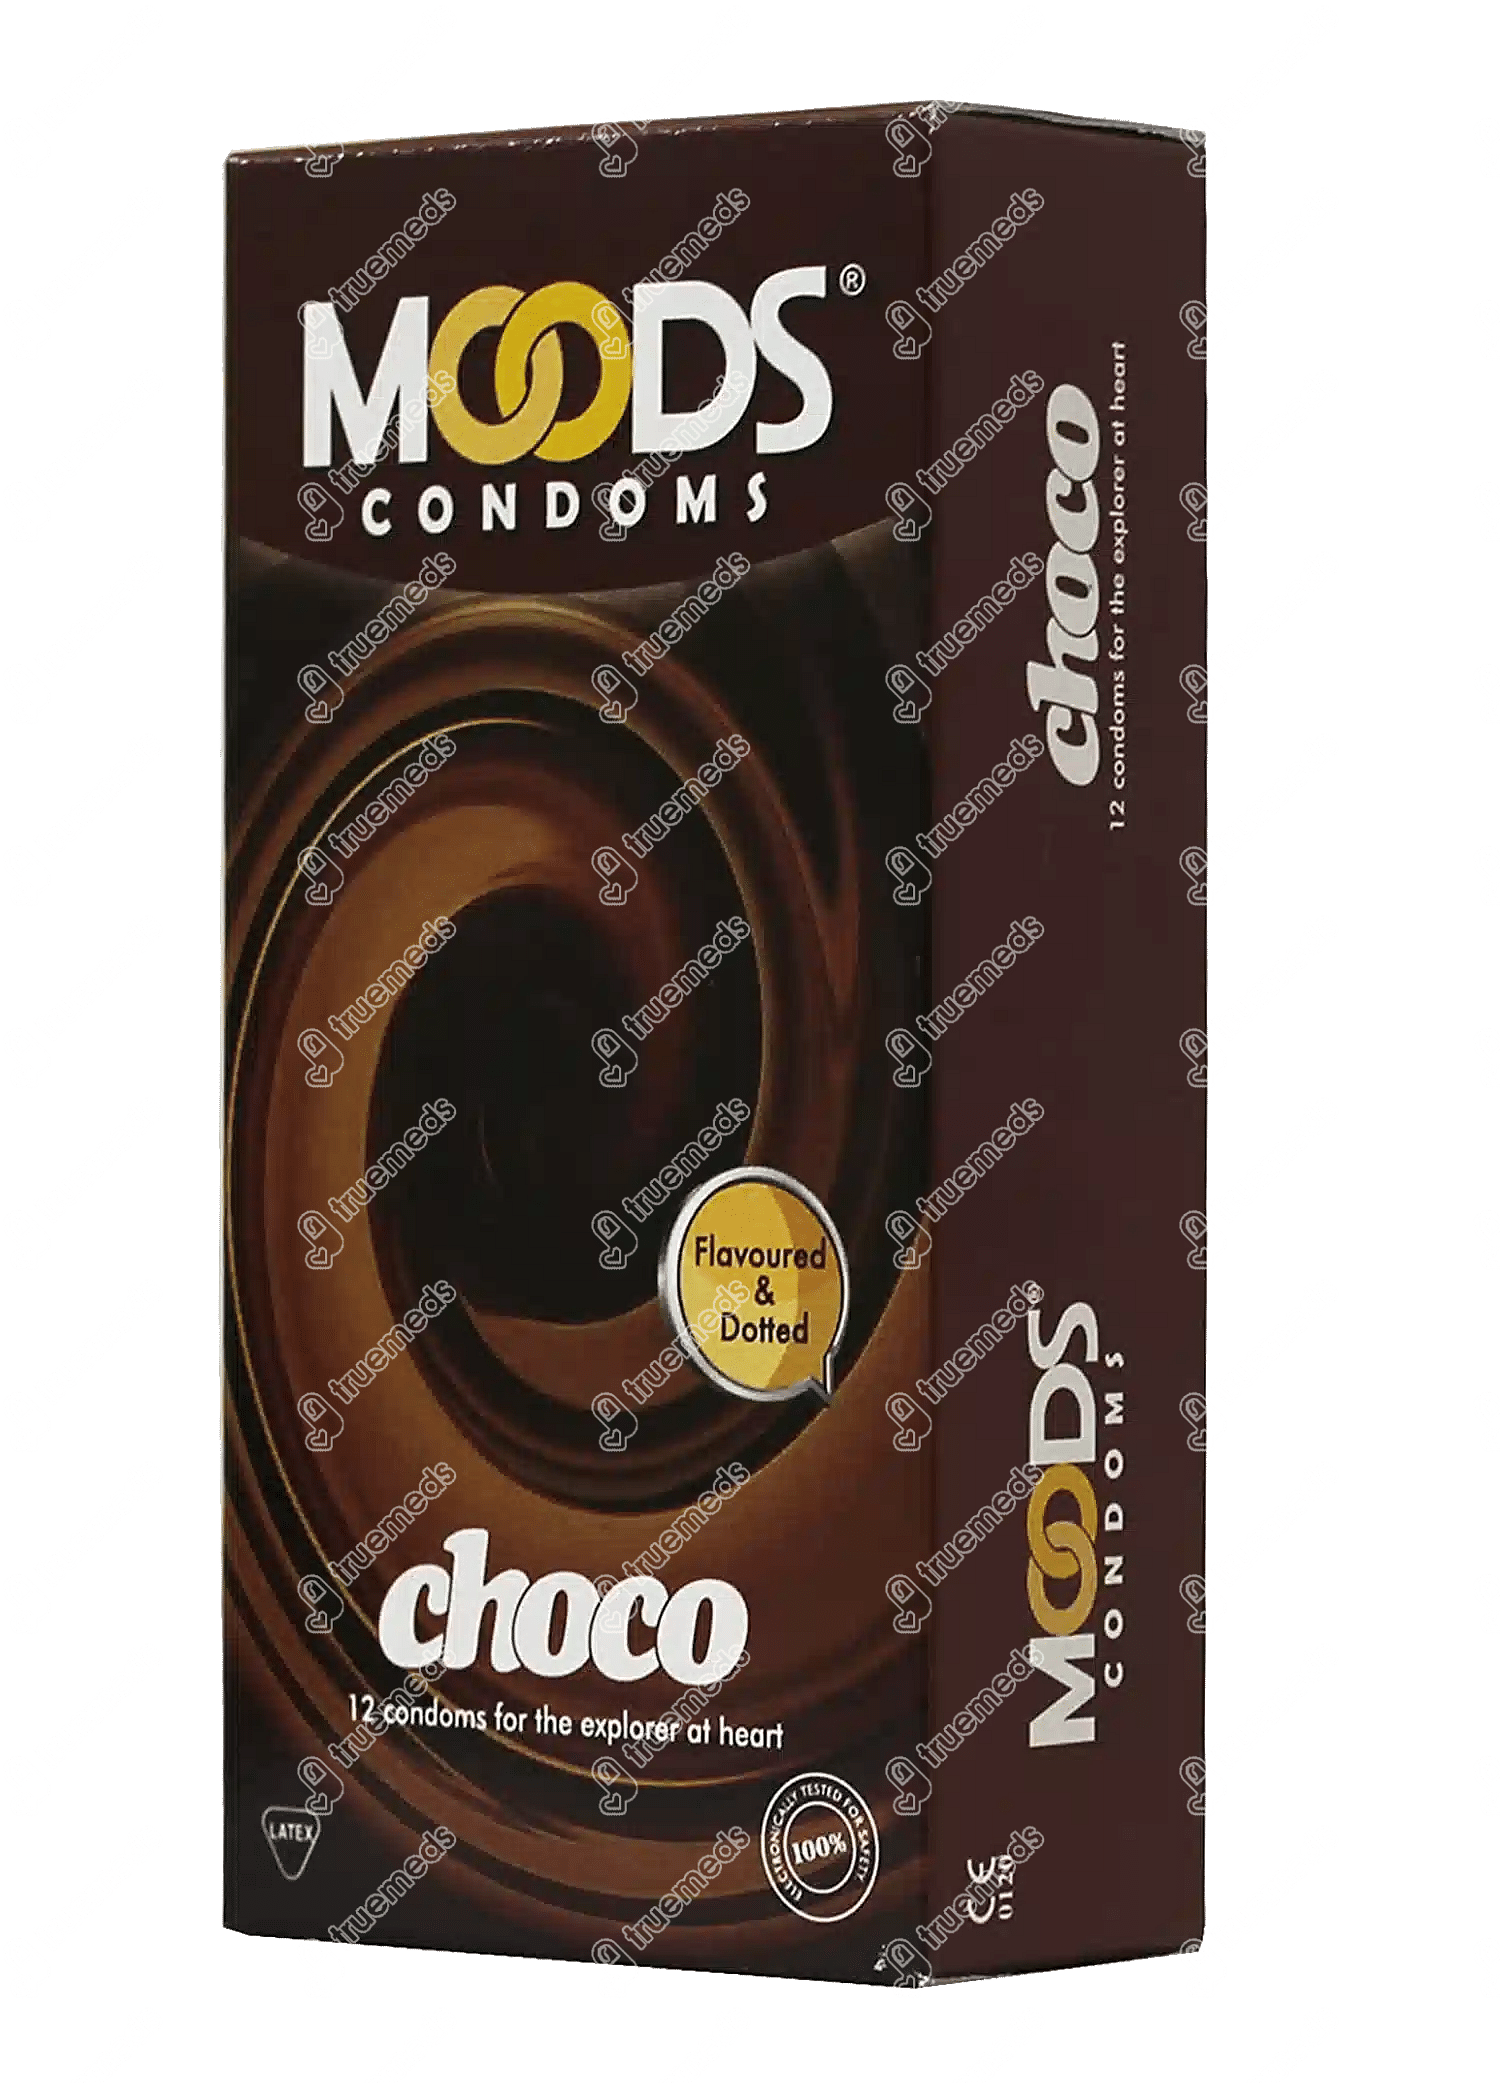 Moods Chocolate Box Of Condom 12 Uses Side Effects Dosage Price